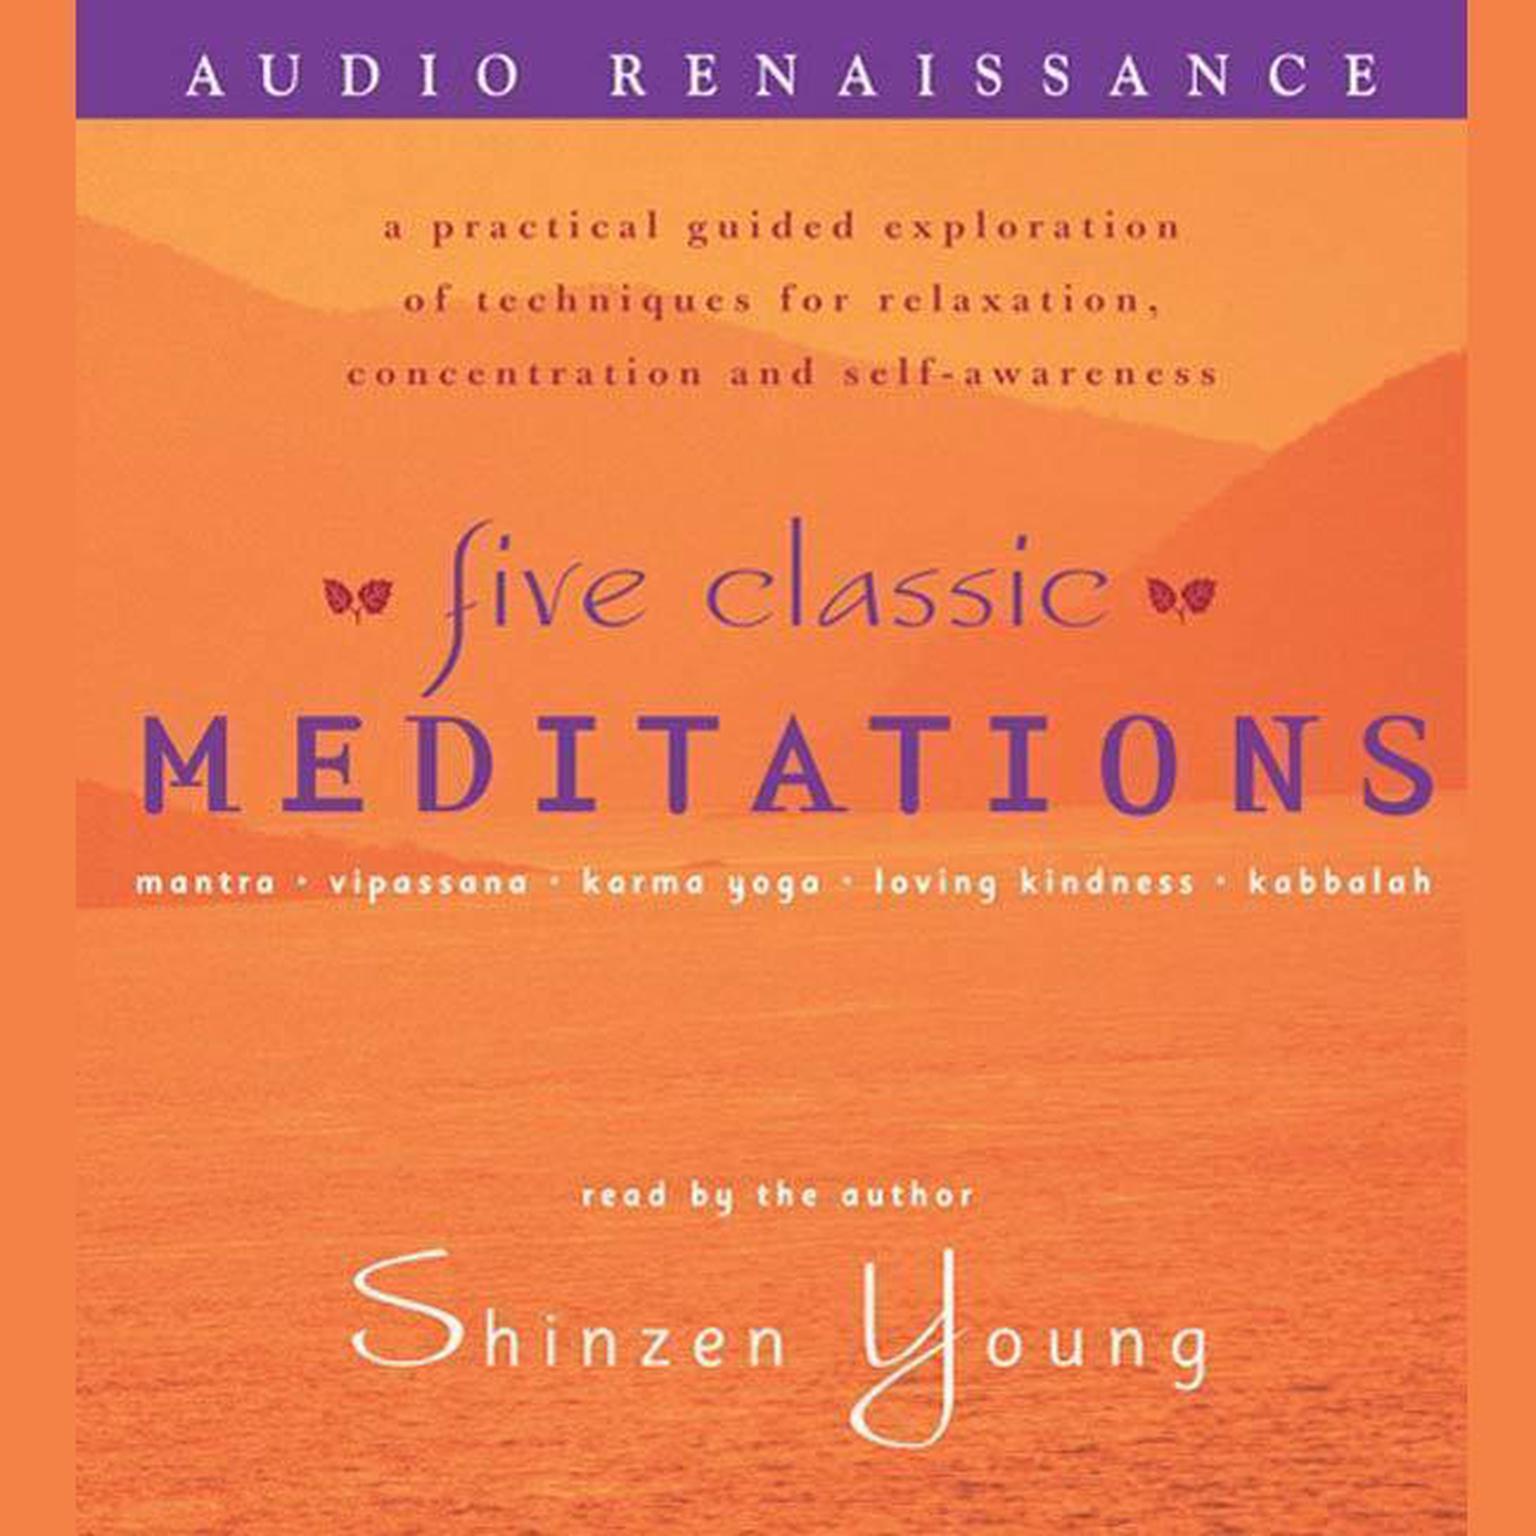 Five Classic Meditations: A Practical Guided Exploration of Techniques for Relaxation, Concentration and Self-Awareness Audiobook, by Shinzen Young